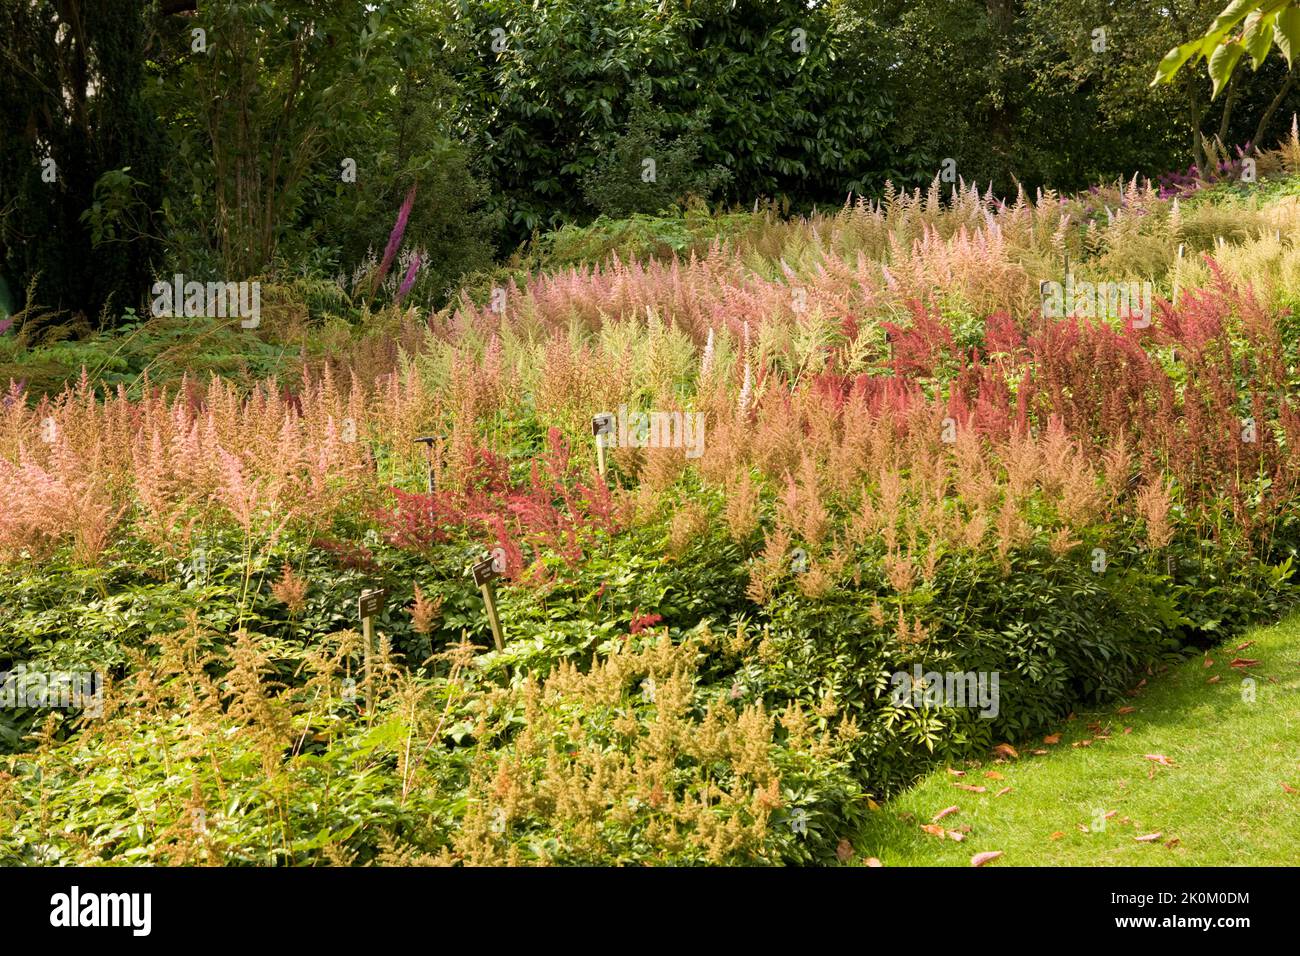 the national Astilbe plant collection at Holehird Gardens. Windermere, Lake district, Cumbria, England, UK Stock Photo